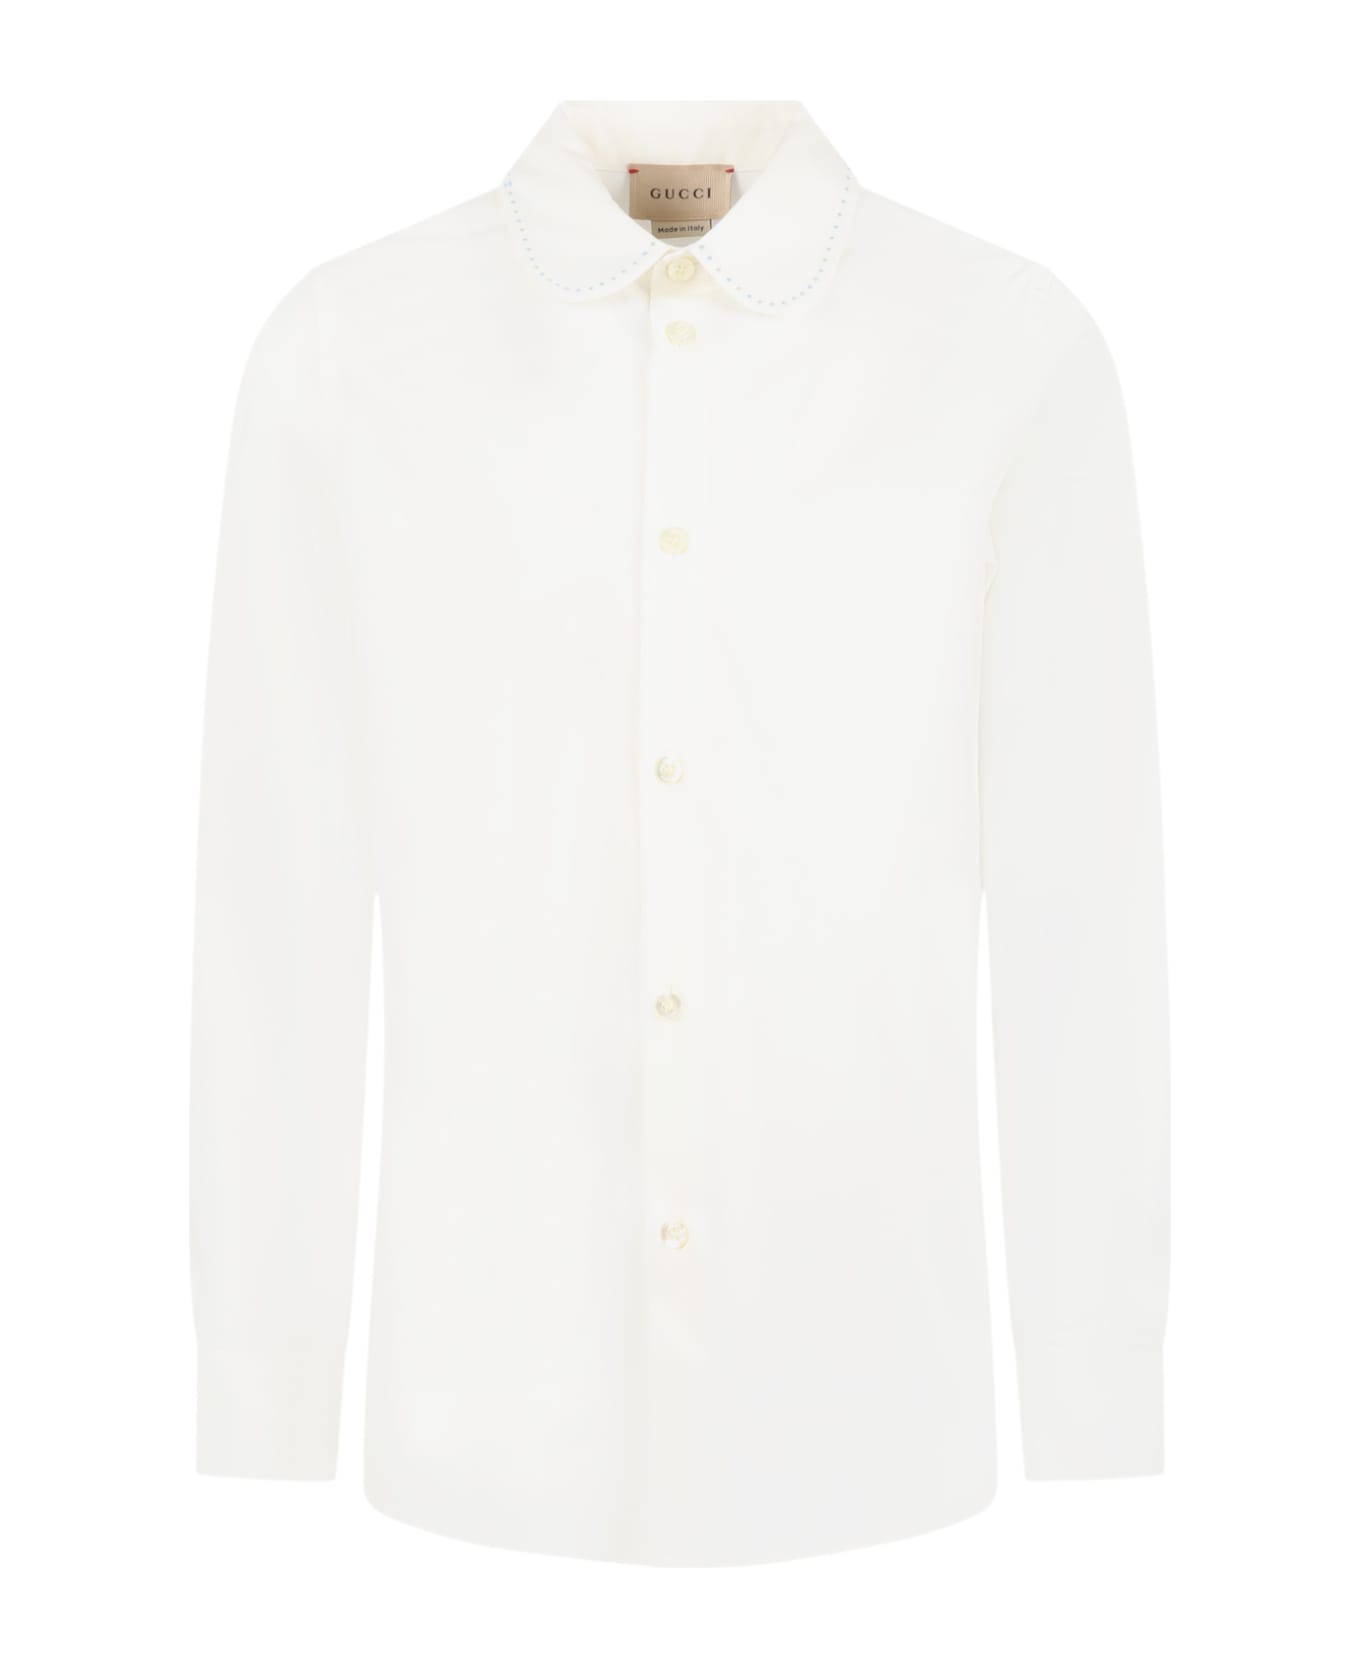 Gucci White Shirt For Boy With Polka Dots - White